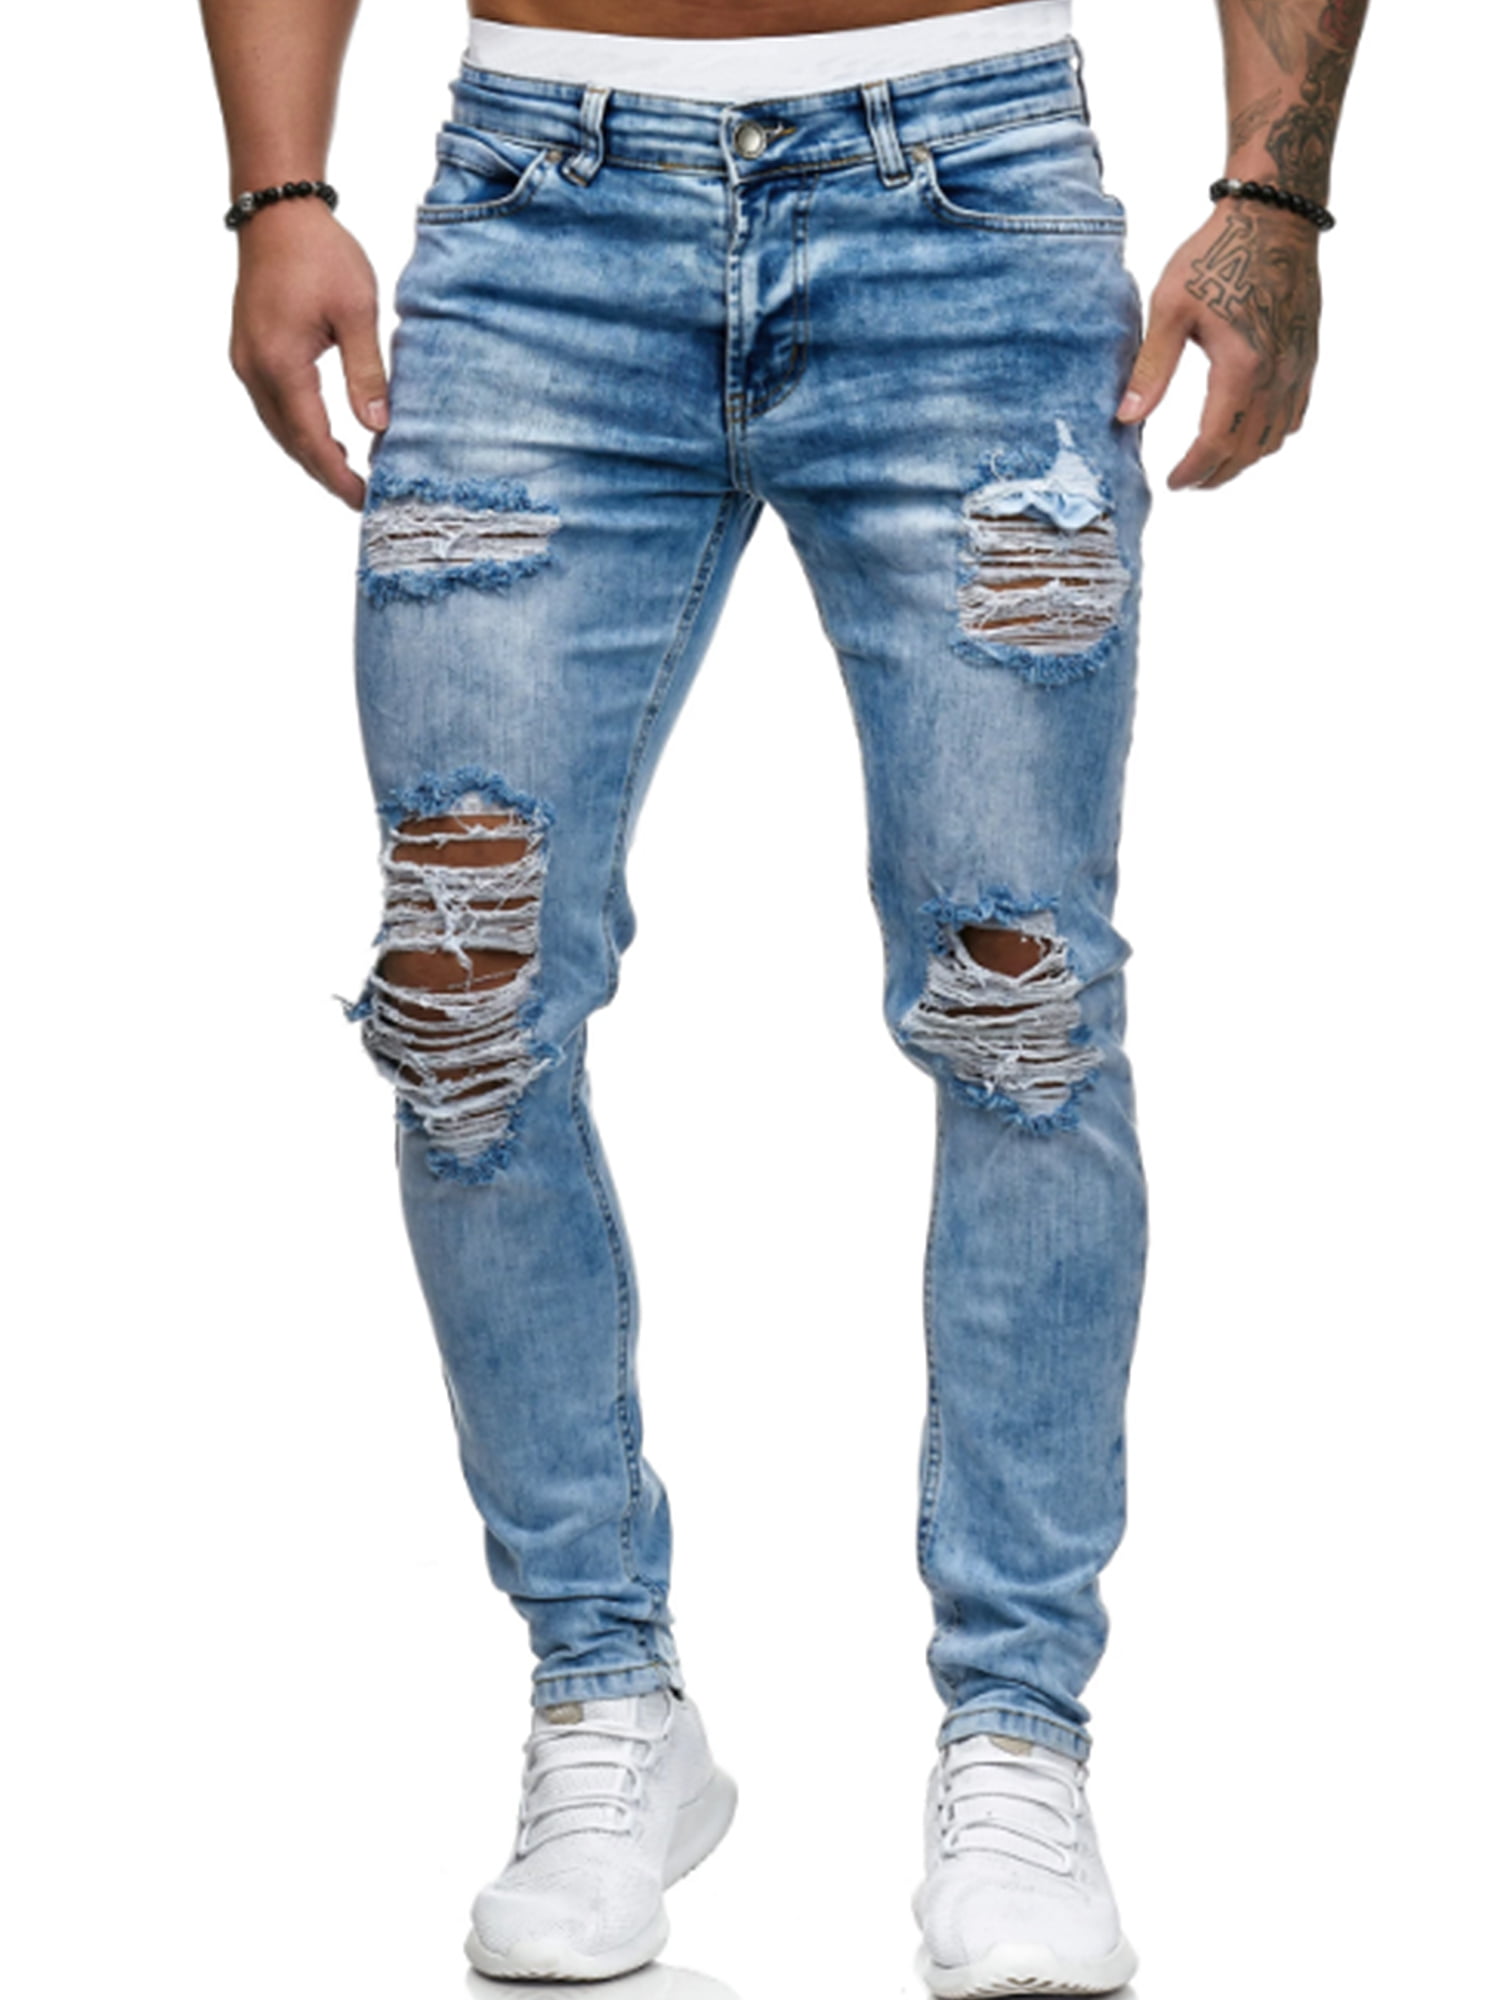 Men's Denim Jeans Pants Skinny Fit Stretch Distressed Ripped Trousers All Waist 